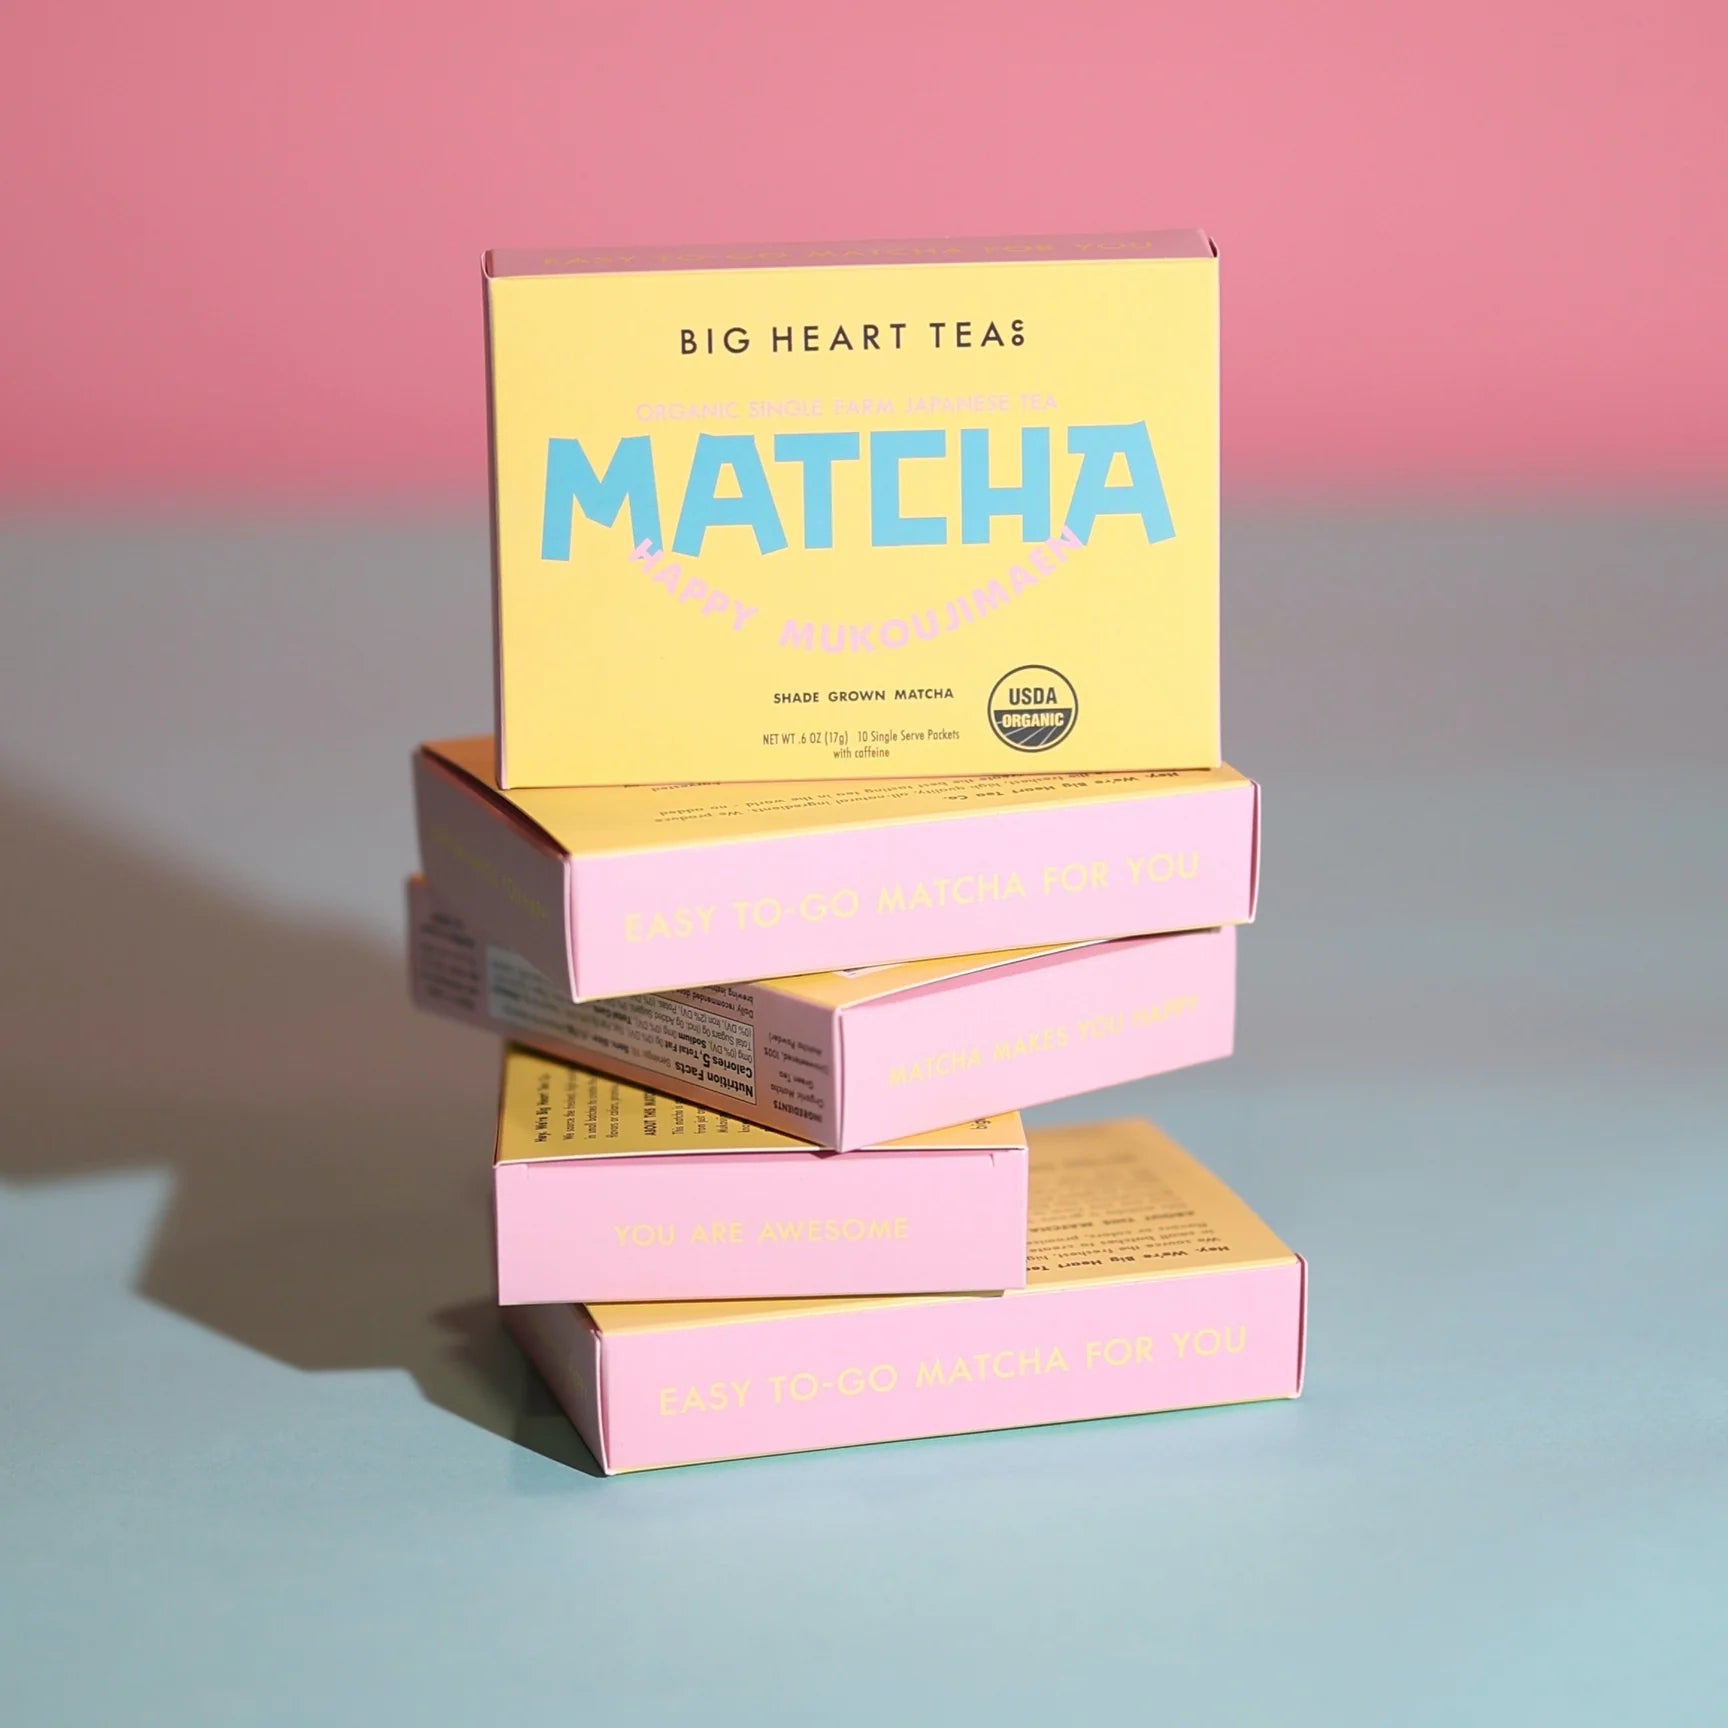 Happy Matcha box stack on pink and blue background